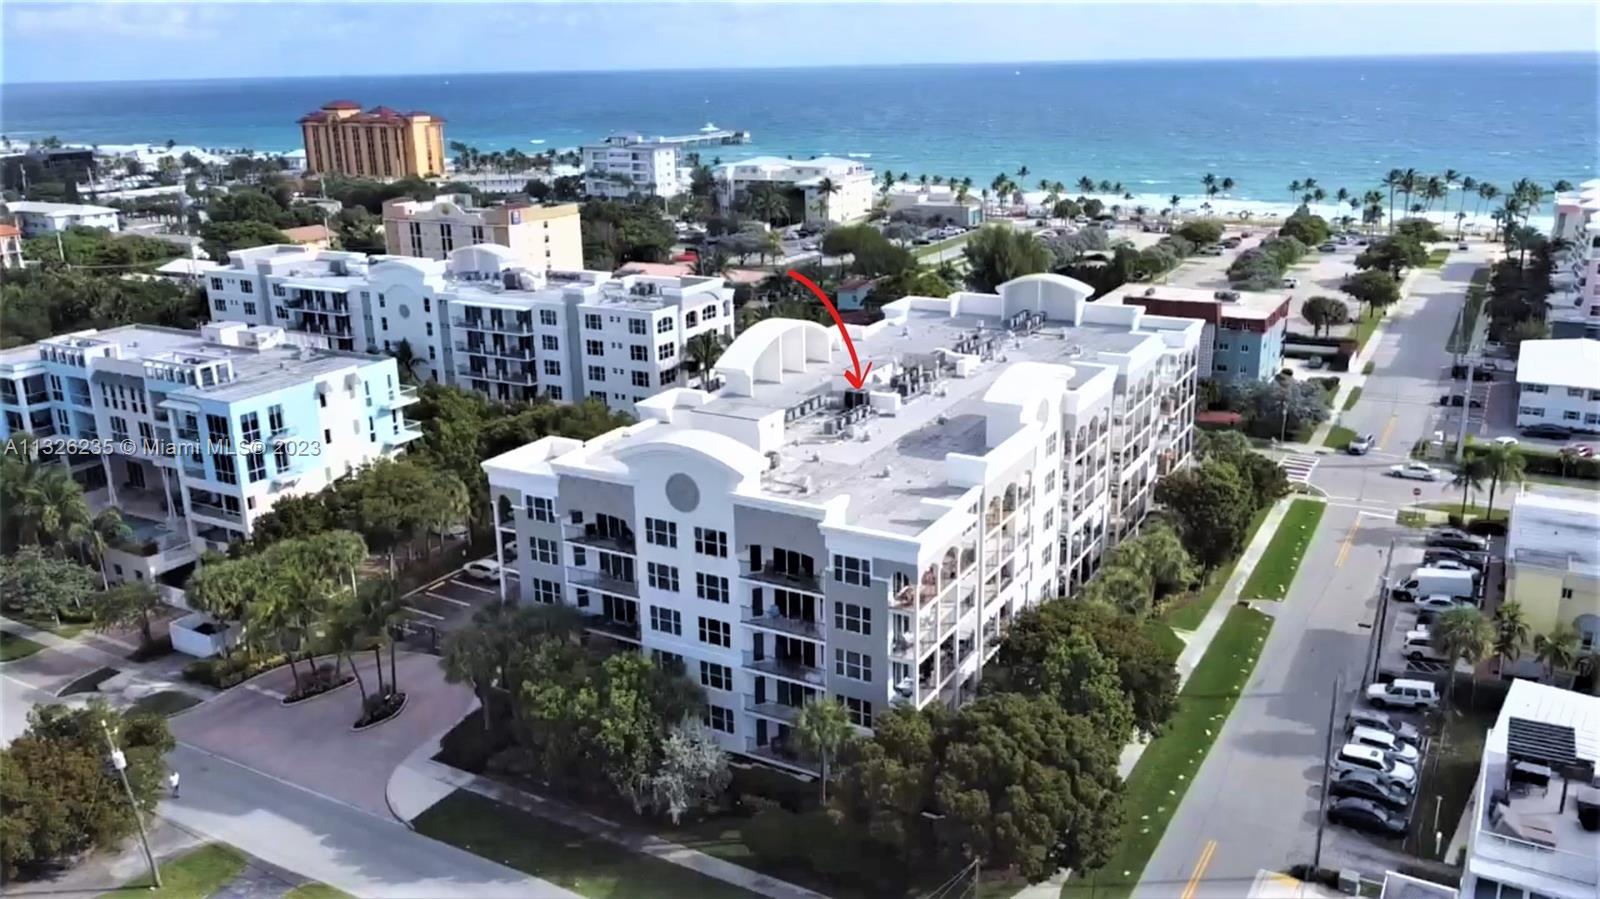 1 Ocean Boulevard is a sophisticated urban condominium community offering residents the ultimate exp